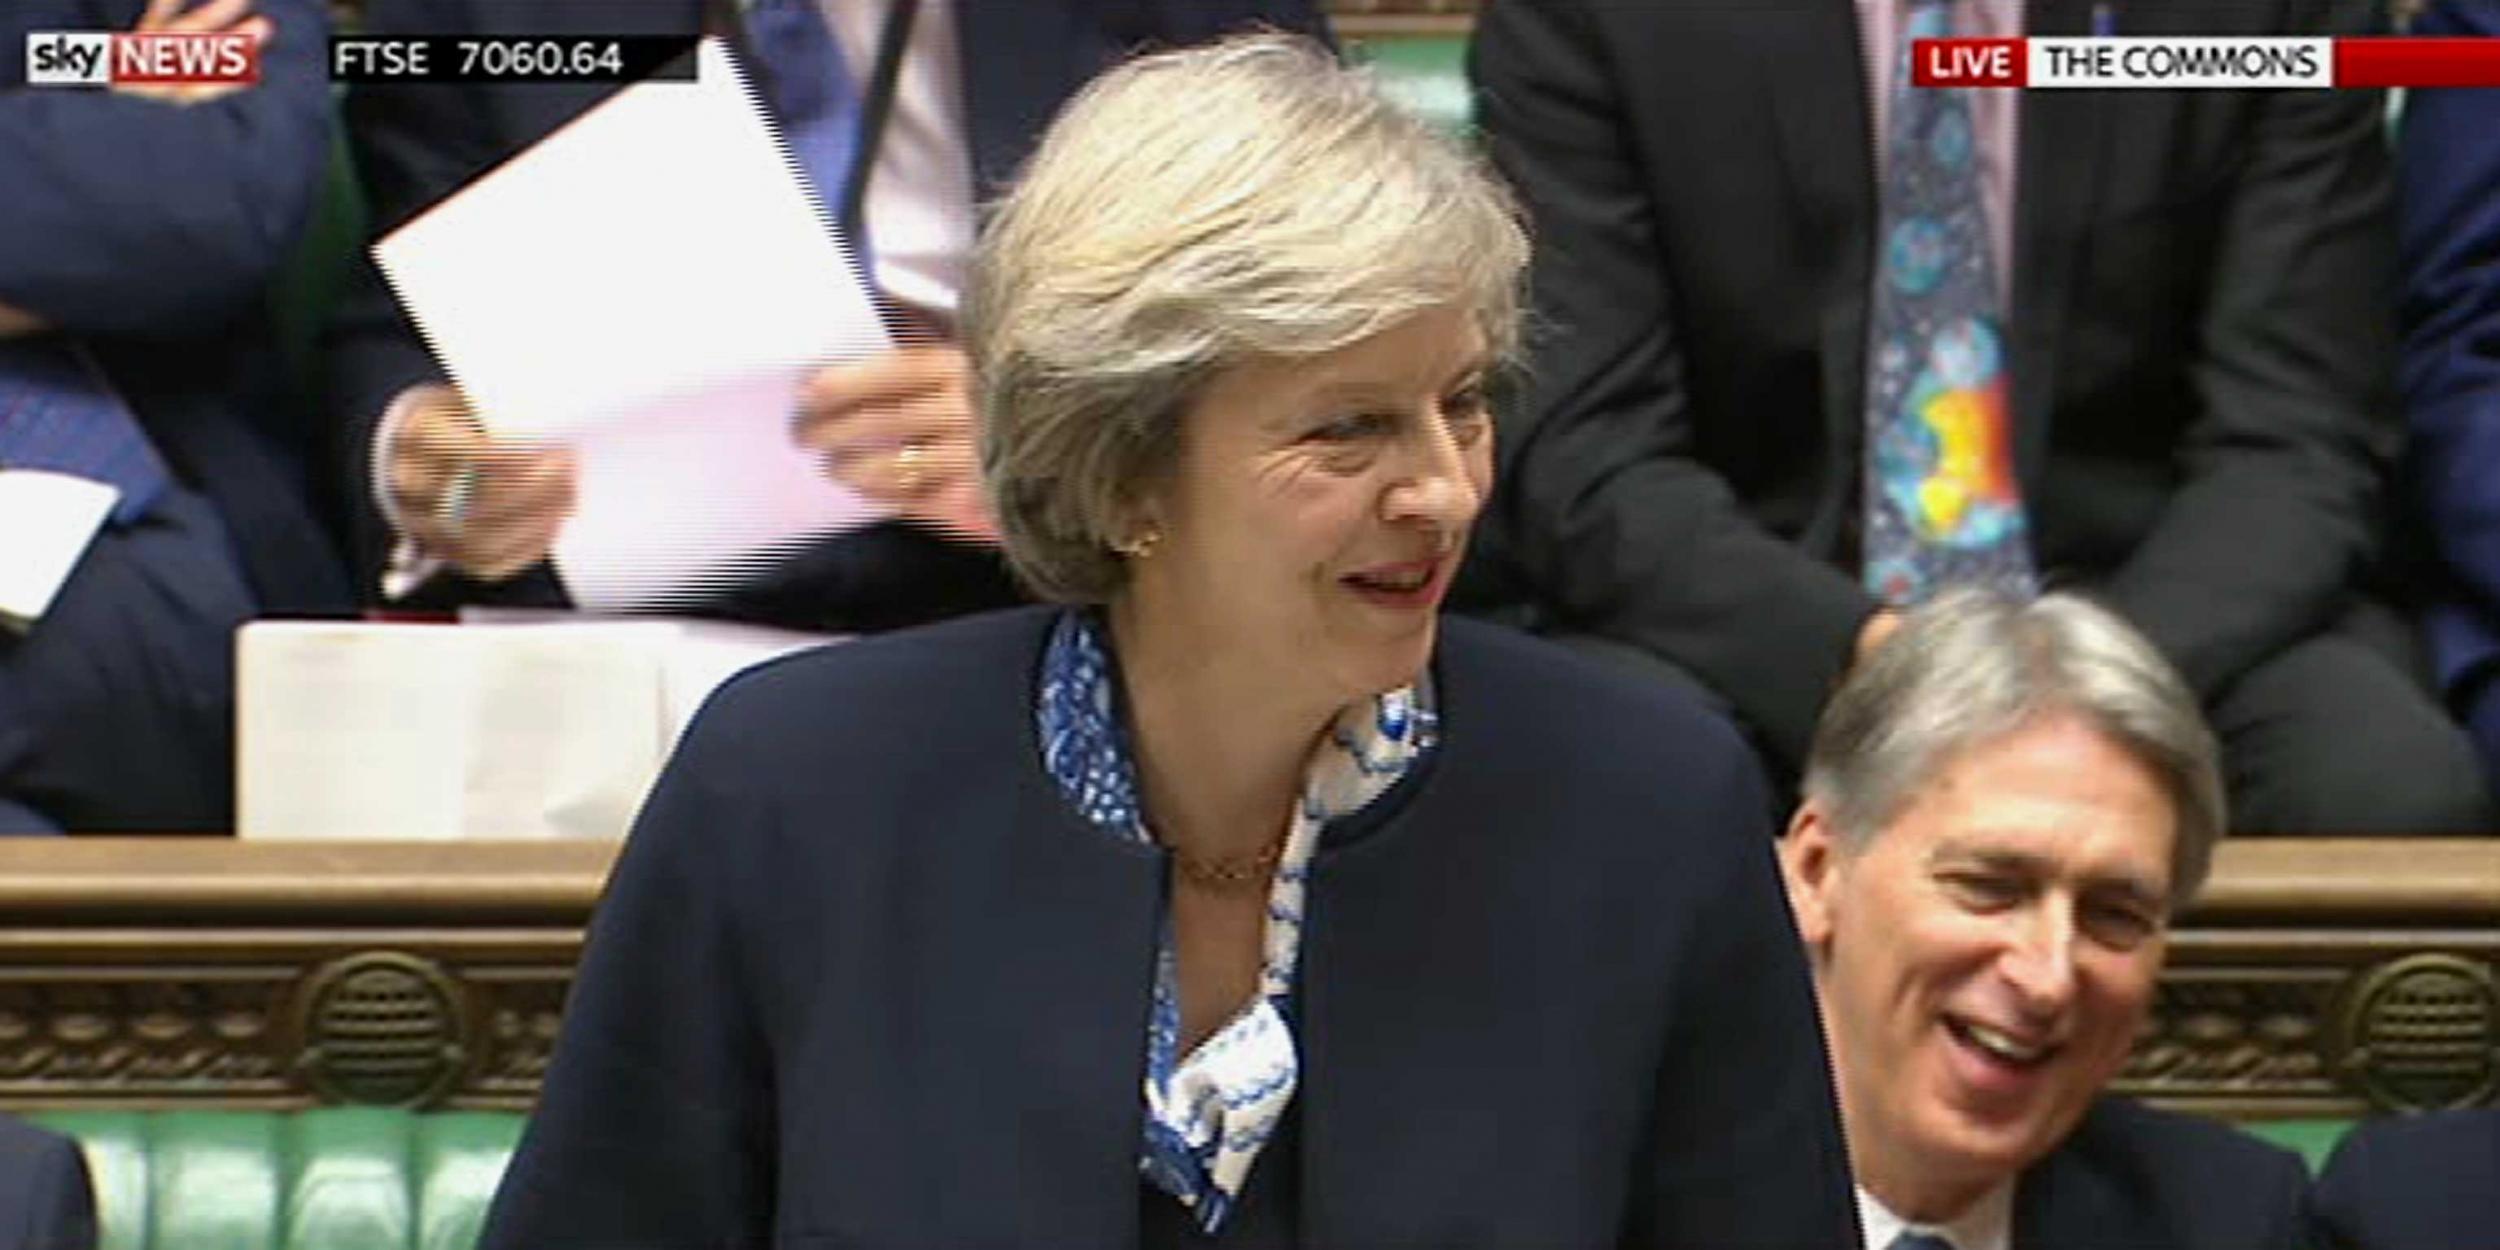 Theresa May won her exchange with Jeremy Corbyn at PMQs